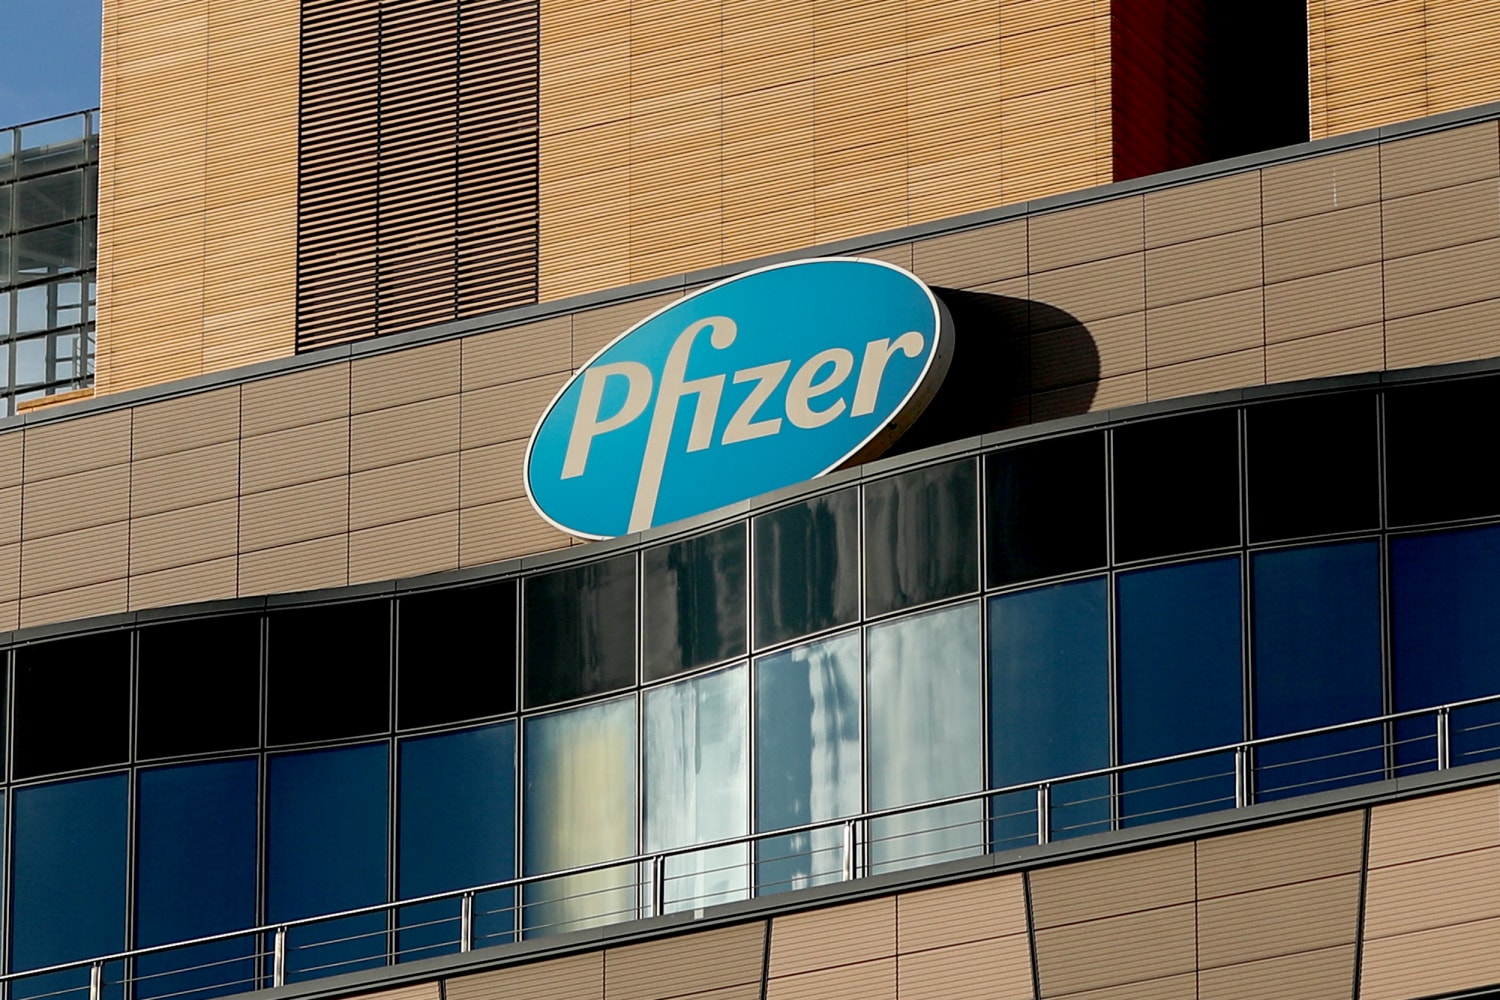 Pfizer agrees to let other companies make its Covid pill to allow broader global access